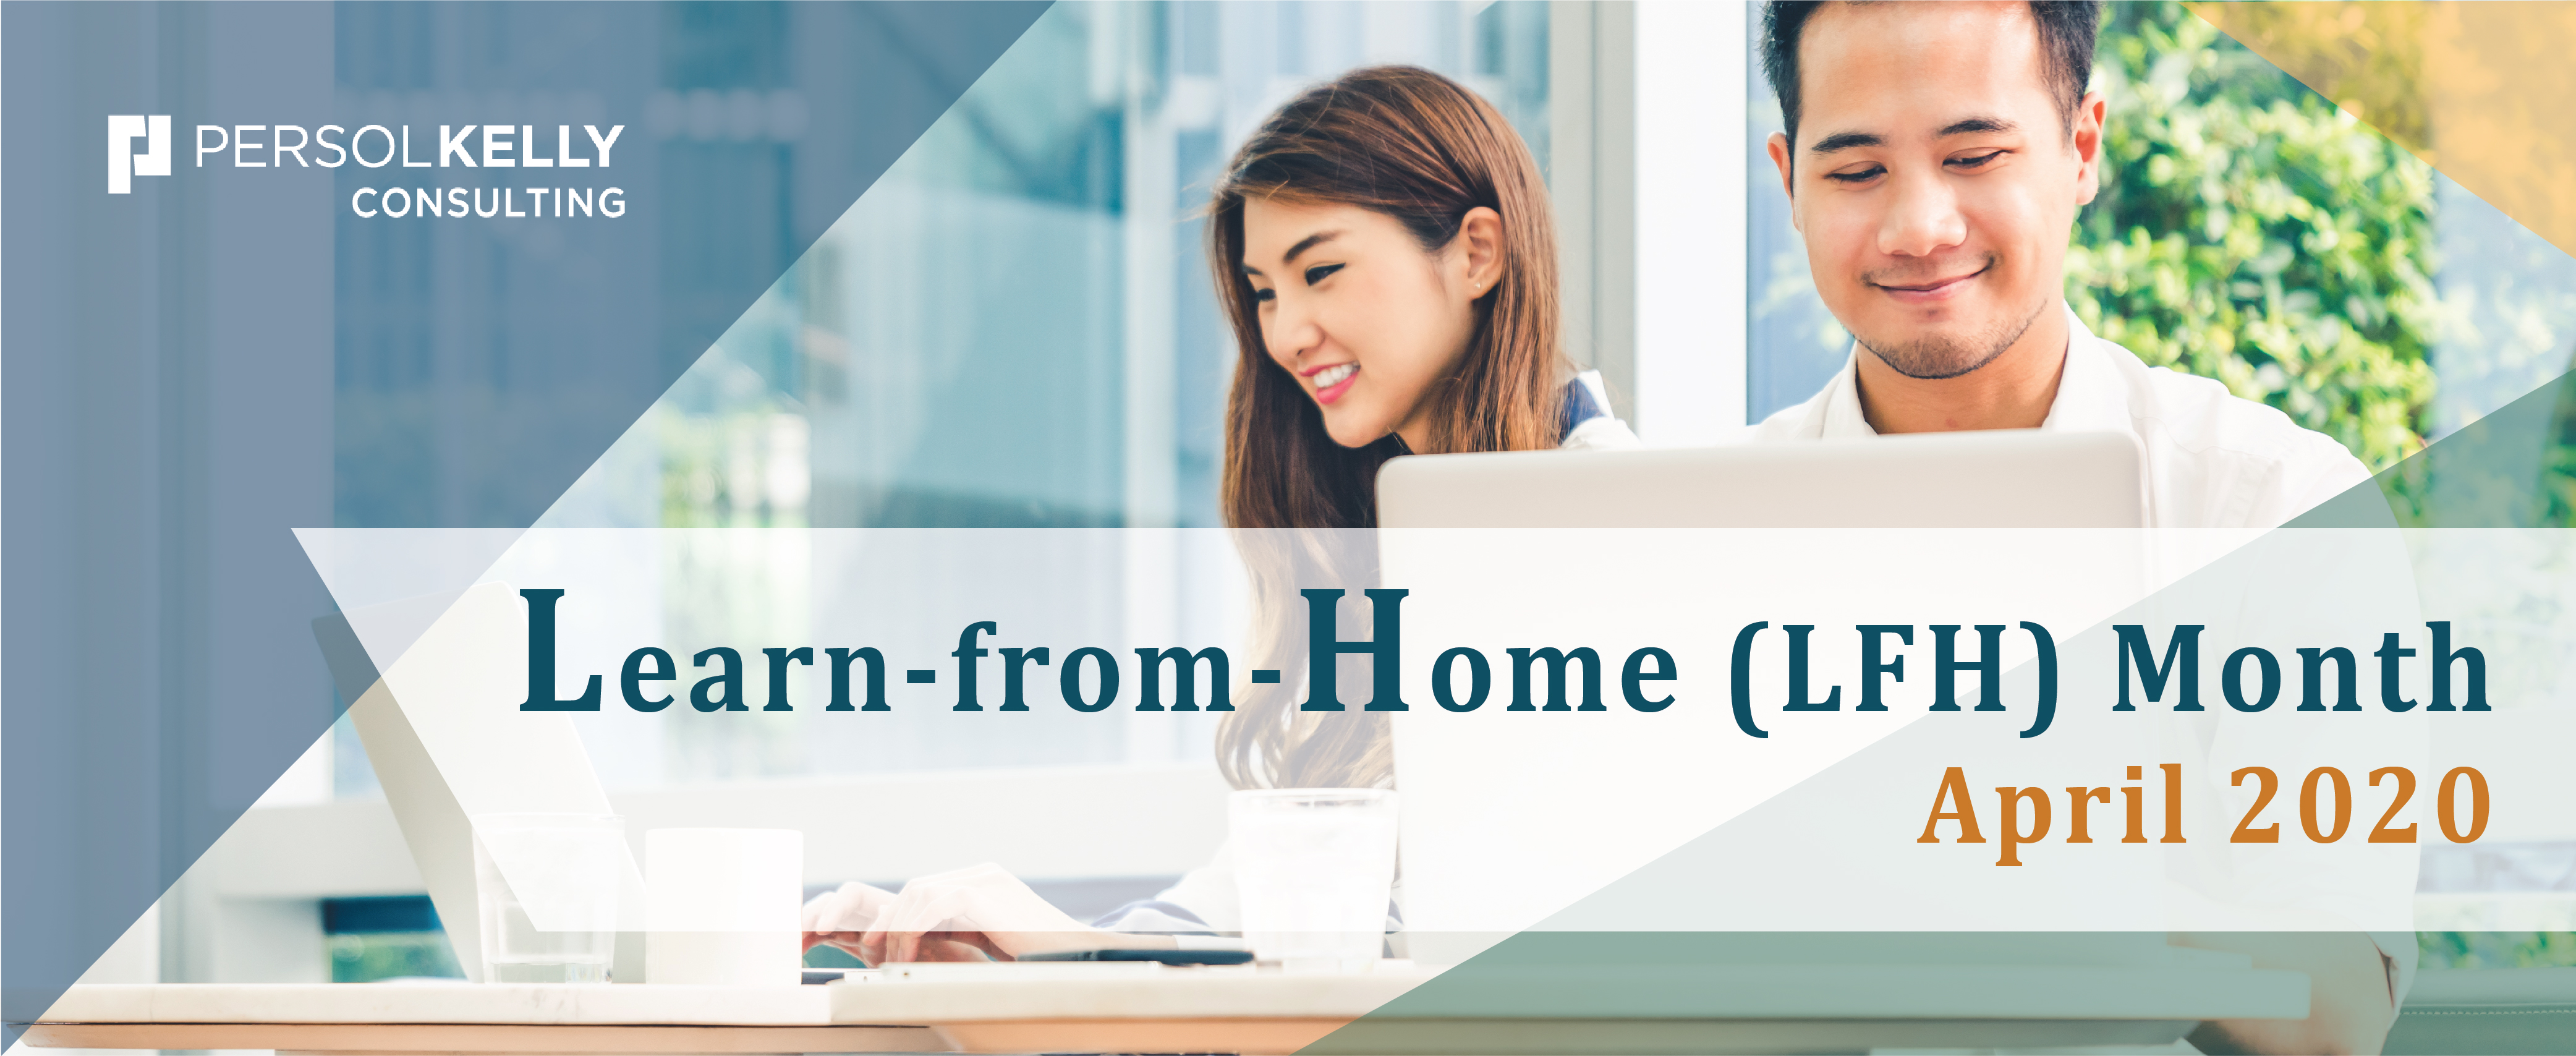 Learn-from-Home Month